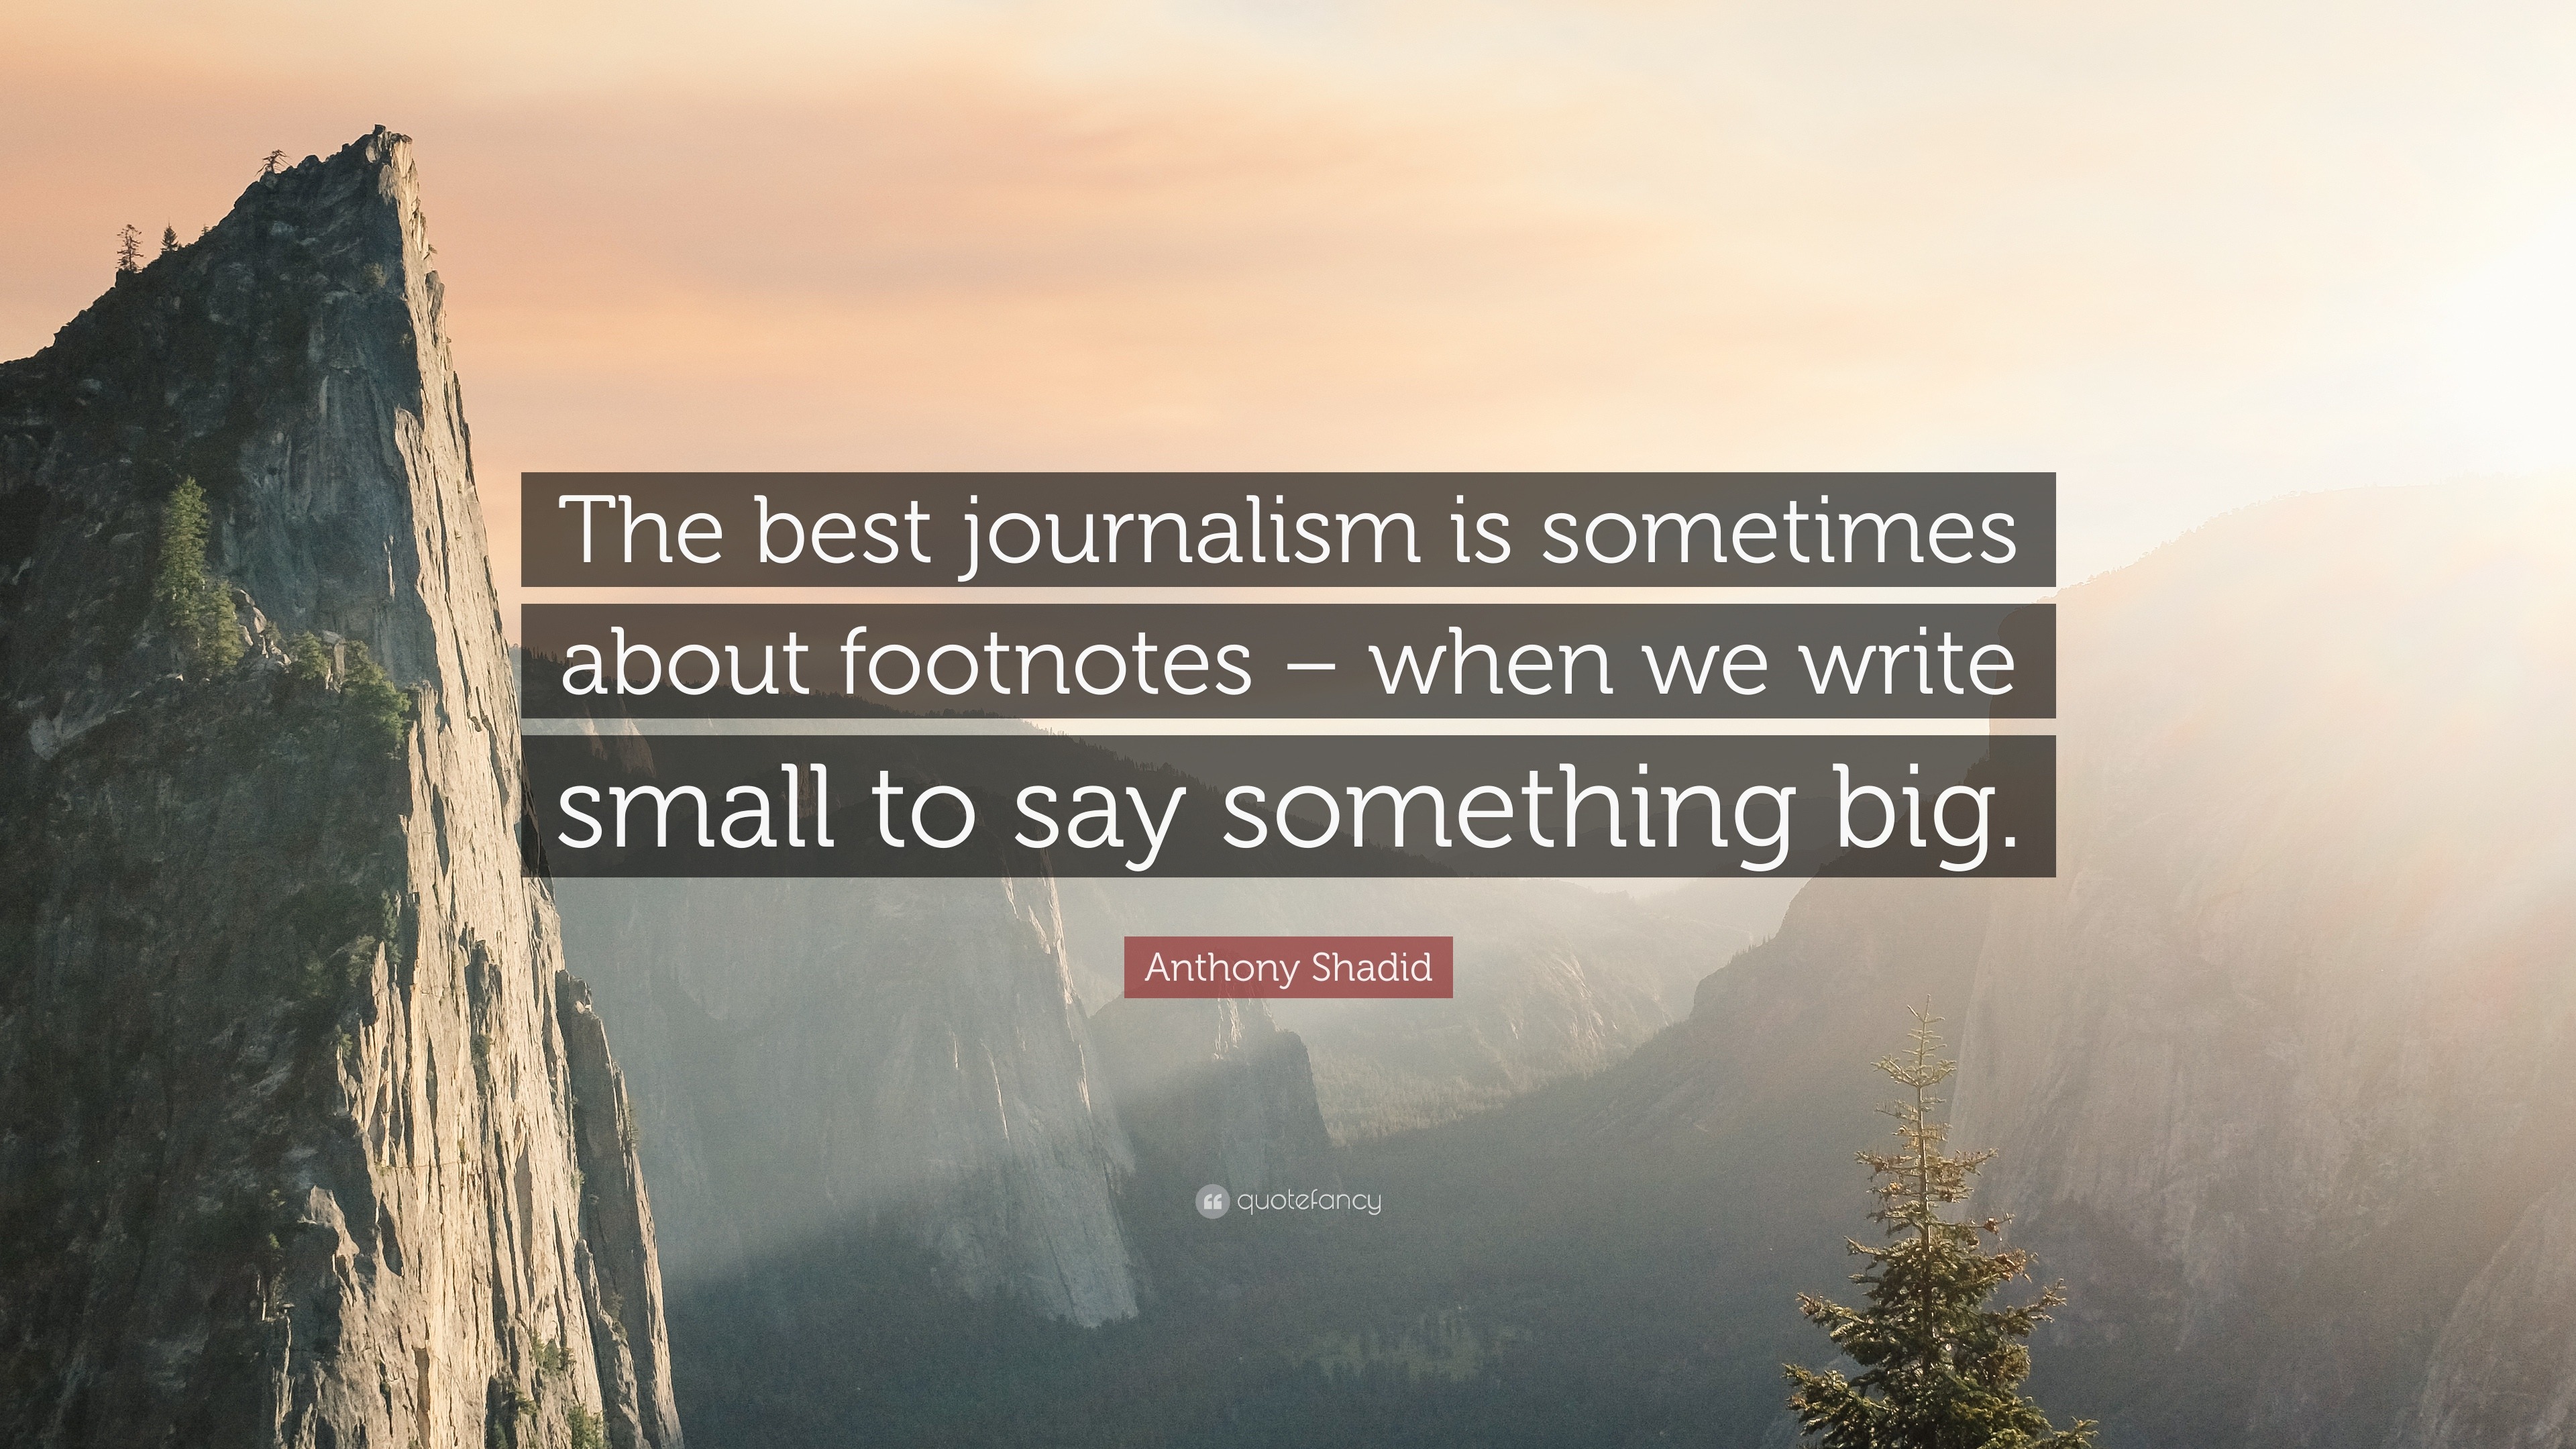 Anthony Shadid Quote “the Best Journalism Is Sometimes About Footnotes When We Write Small To